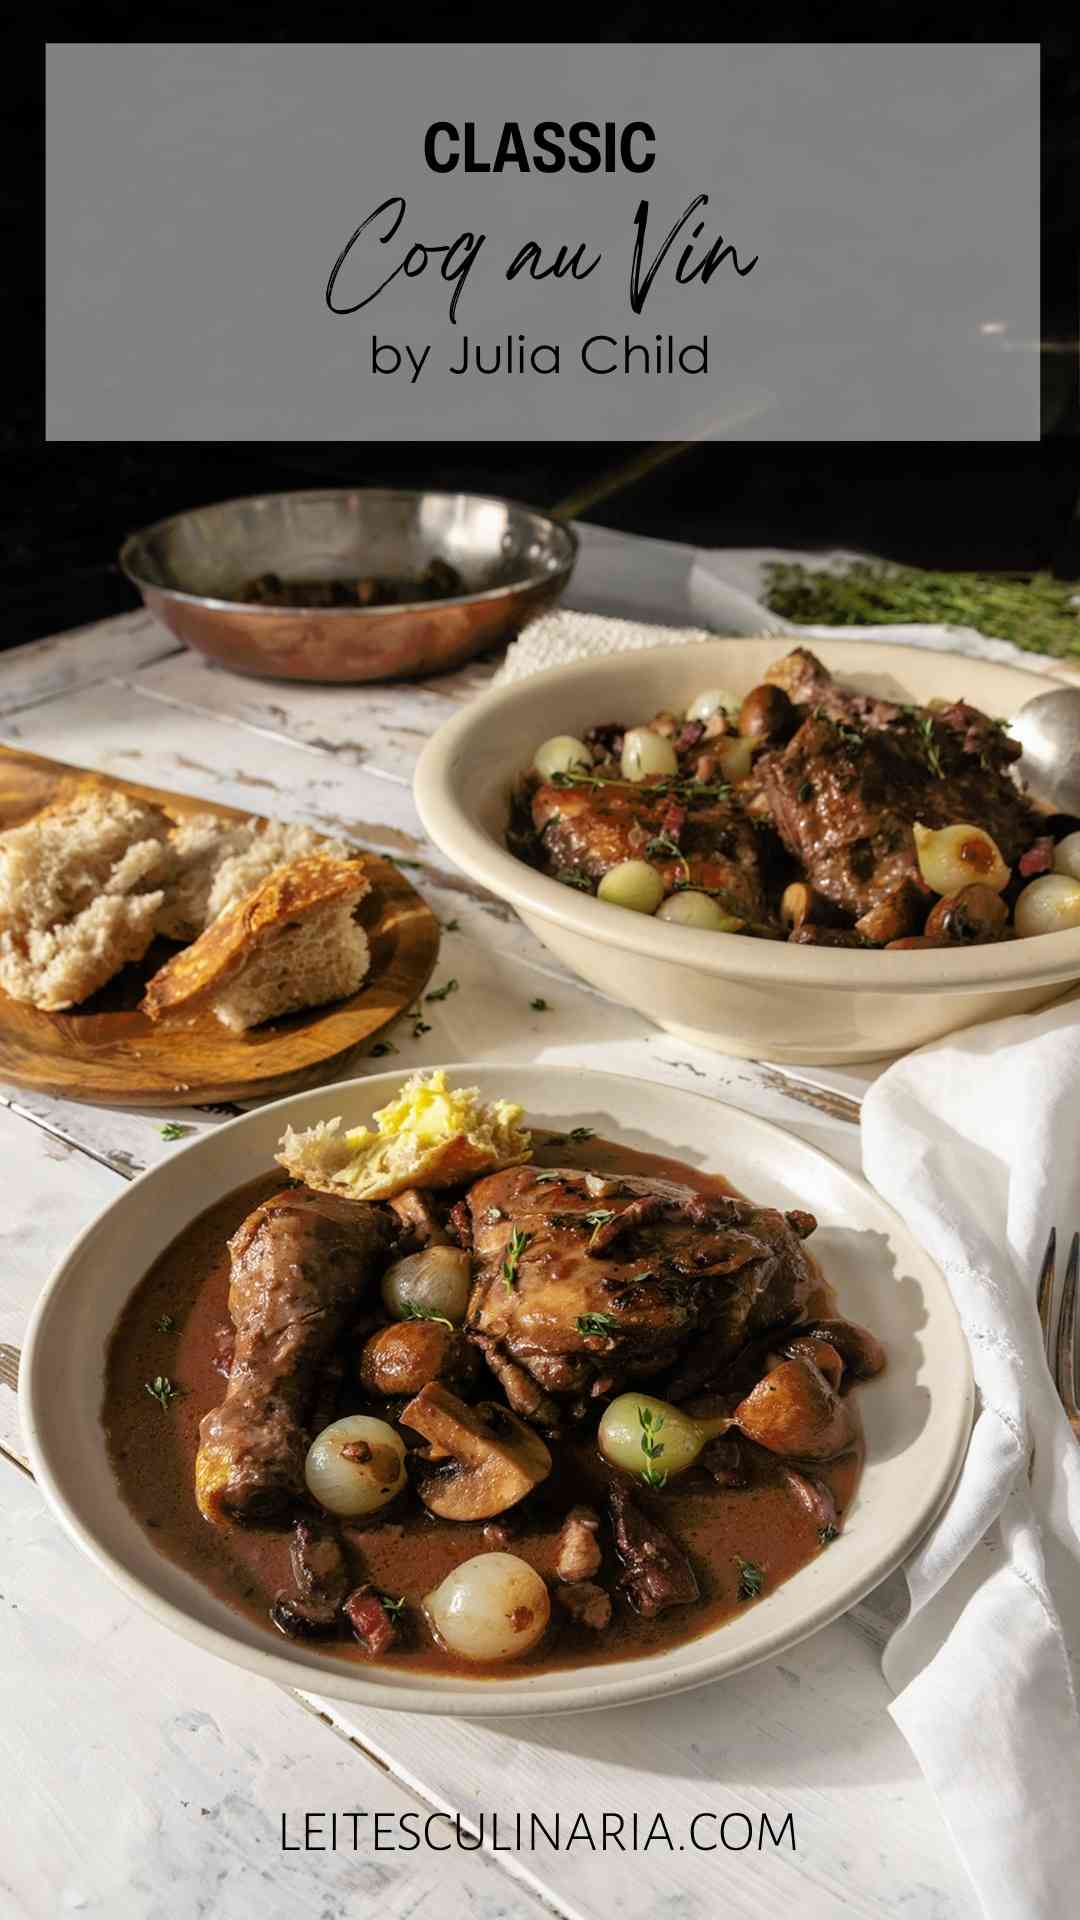 Two bowls of coq au vin on a table with sliced bread and fresh herbs.